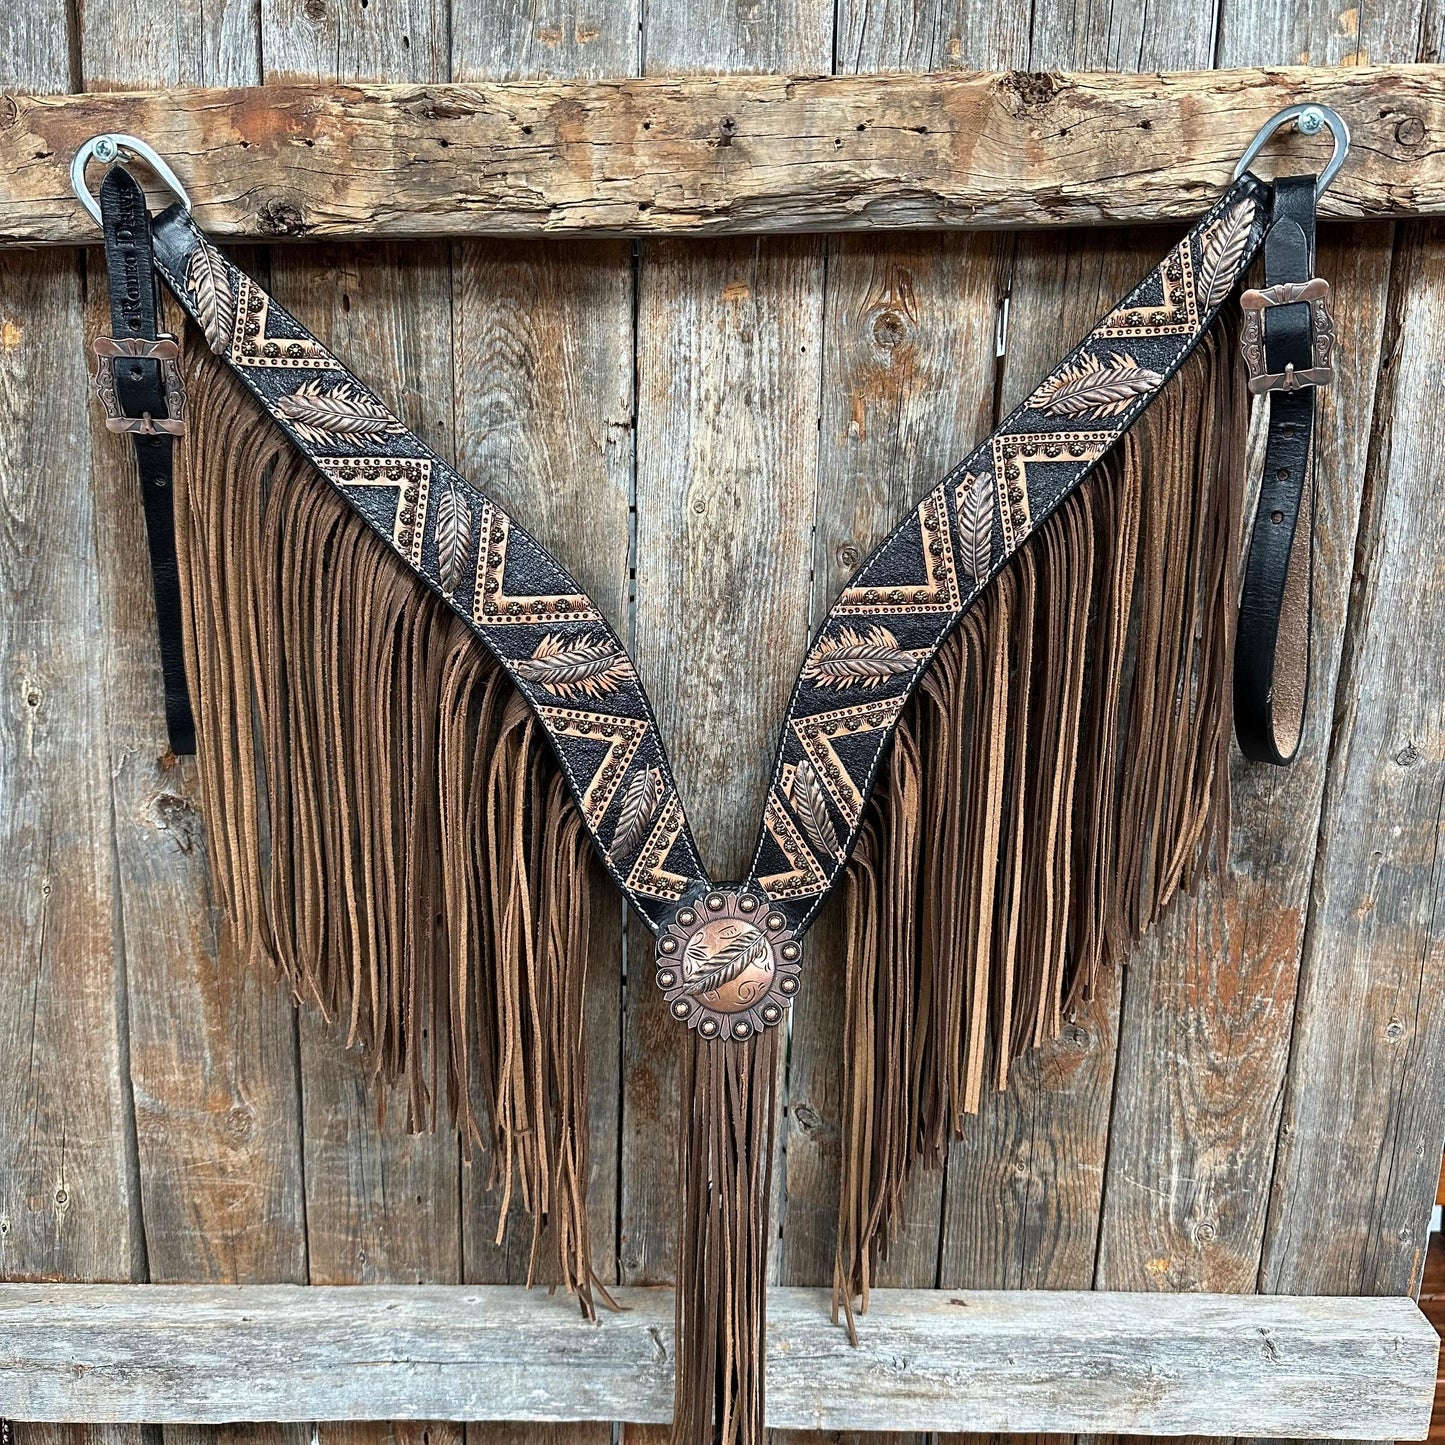 Feathered Arrow Fringed One Ear/ Breastcollar #OEBC553 - RODEO DRIVE